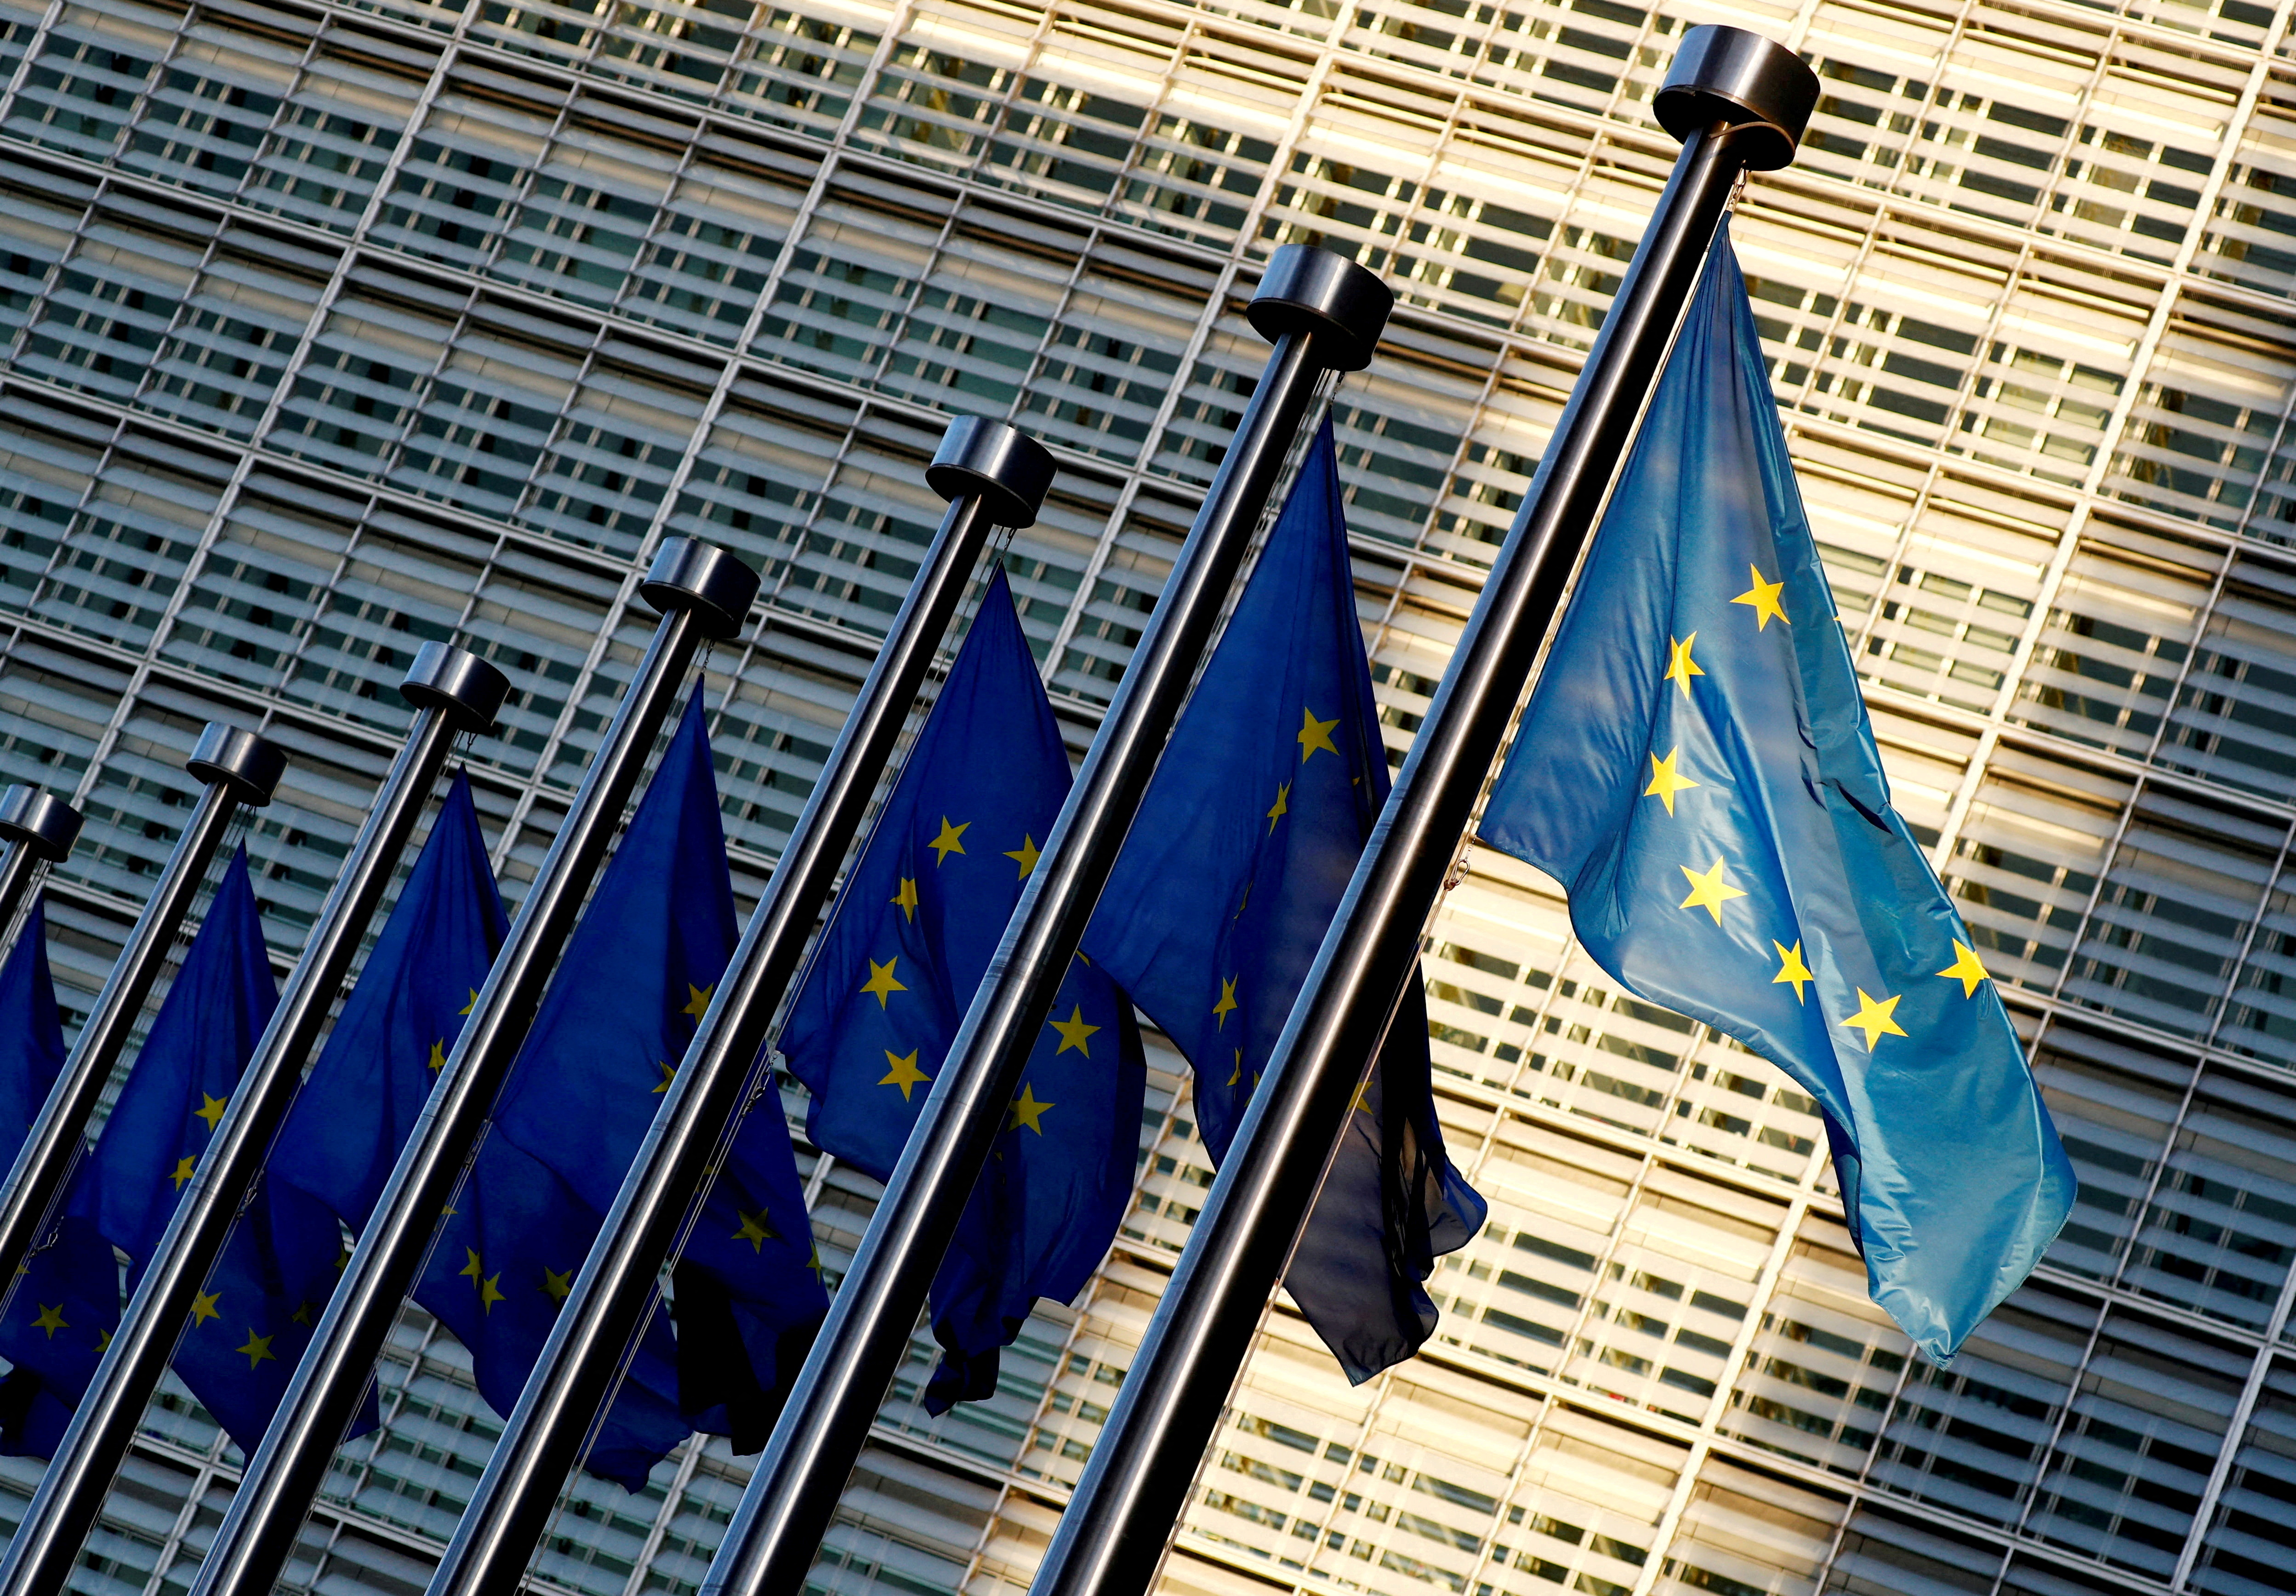 EU flags are seen outside the European Commission headquarters in Brussels